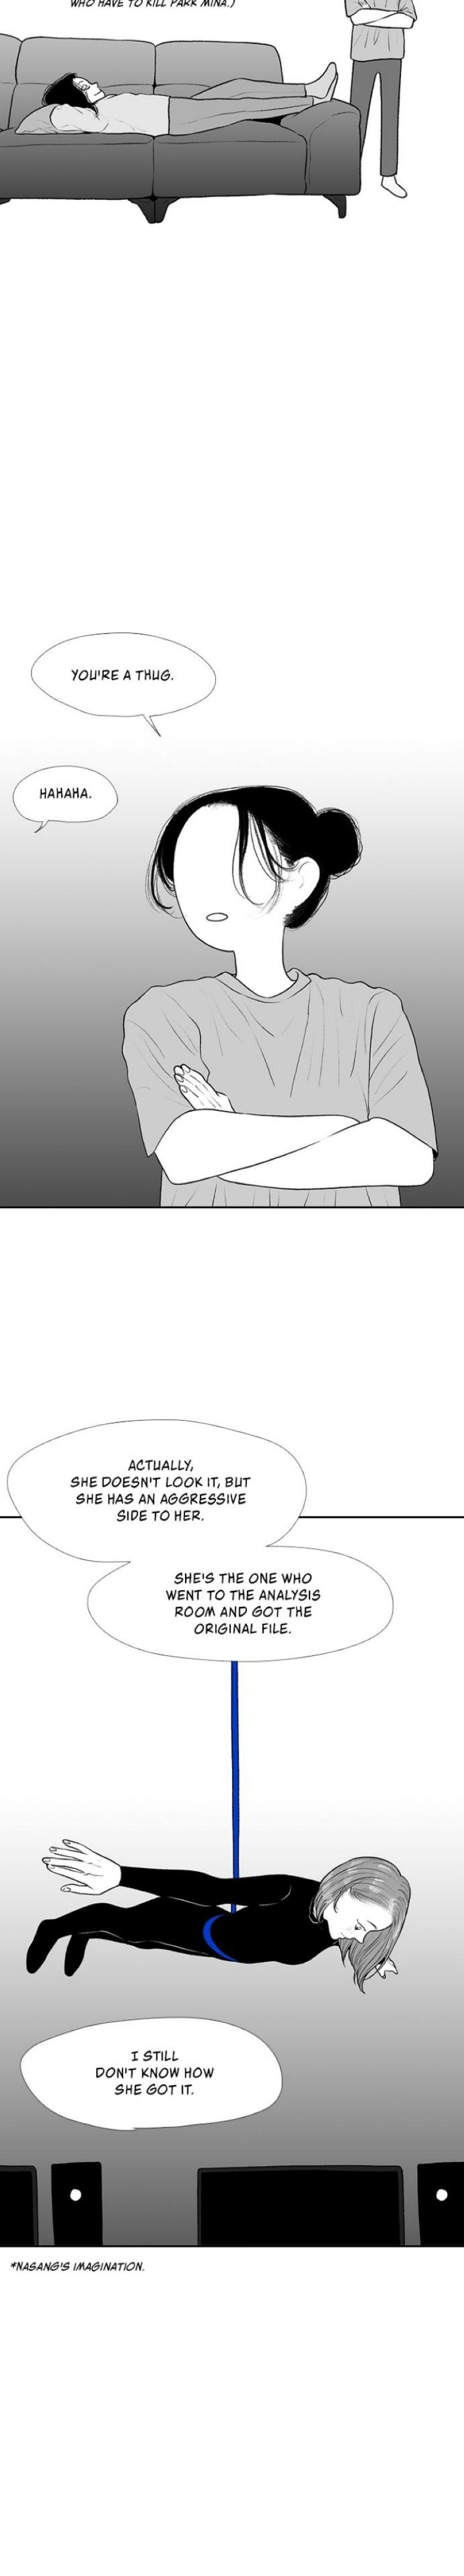 Kill Me Now - Page 2